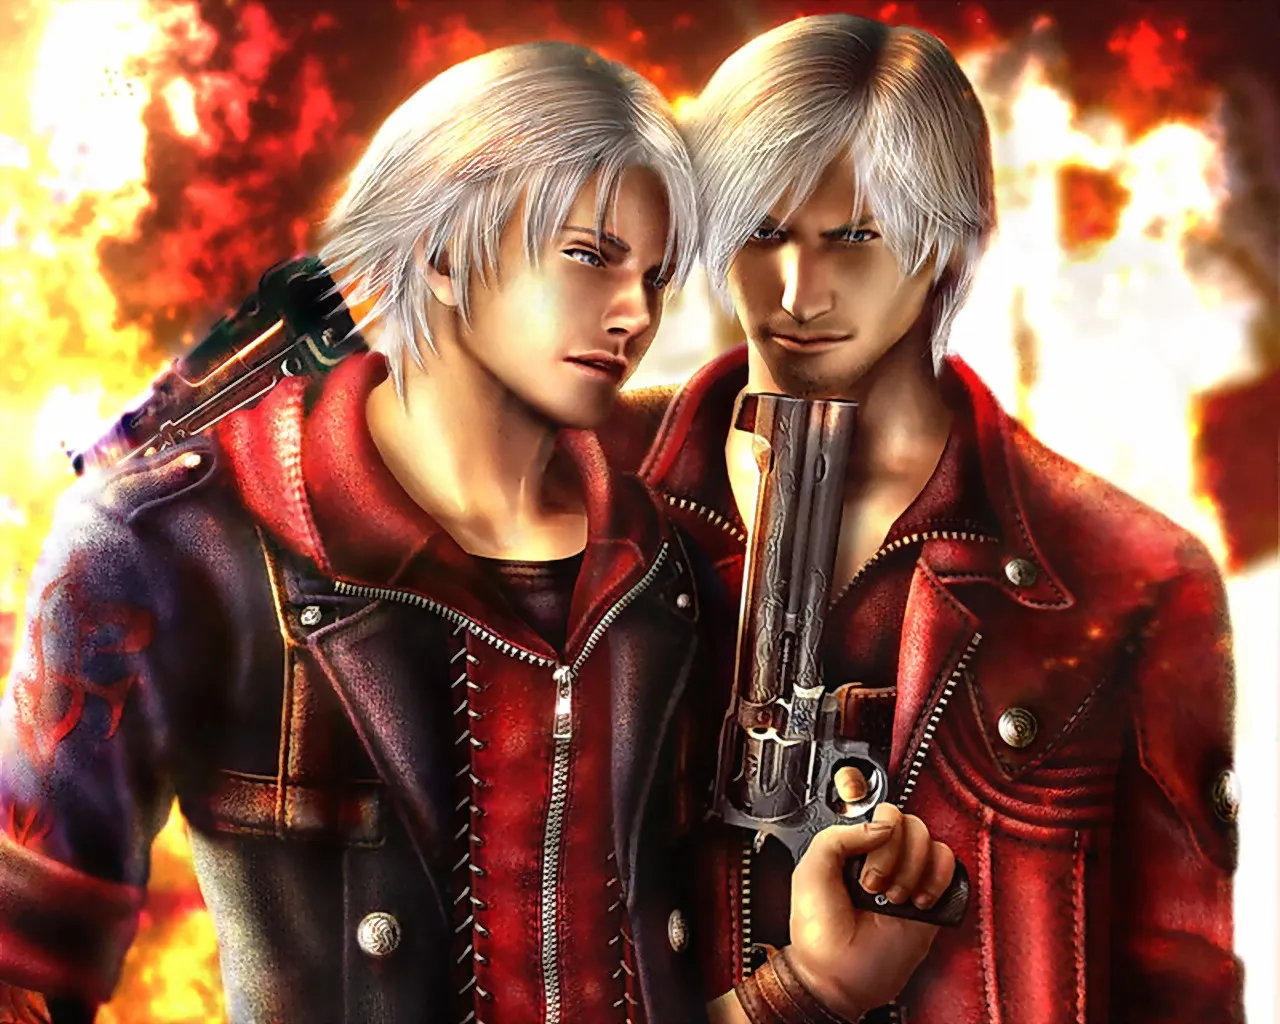 Games devil may cry. Devil May Cry 4 Данте. Данте ДМС 3. Данте из Devil May Cry. Данте и Неро.